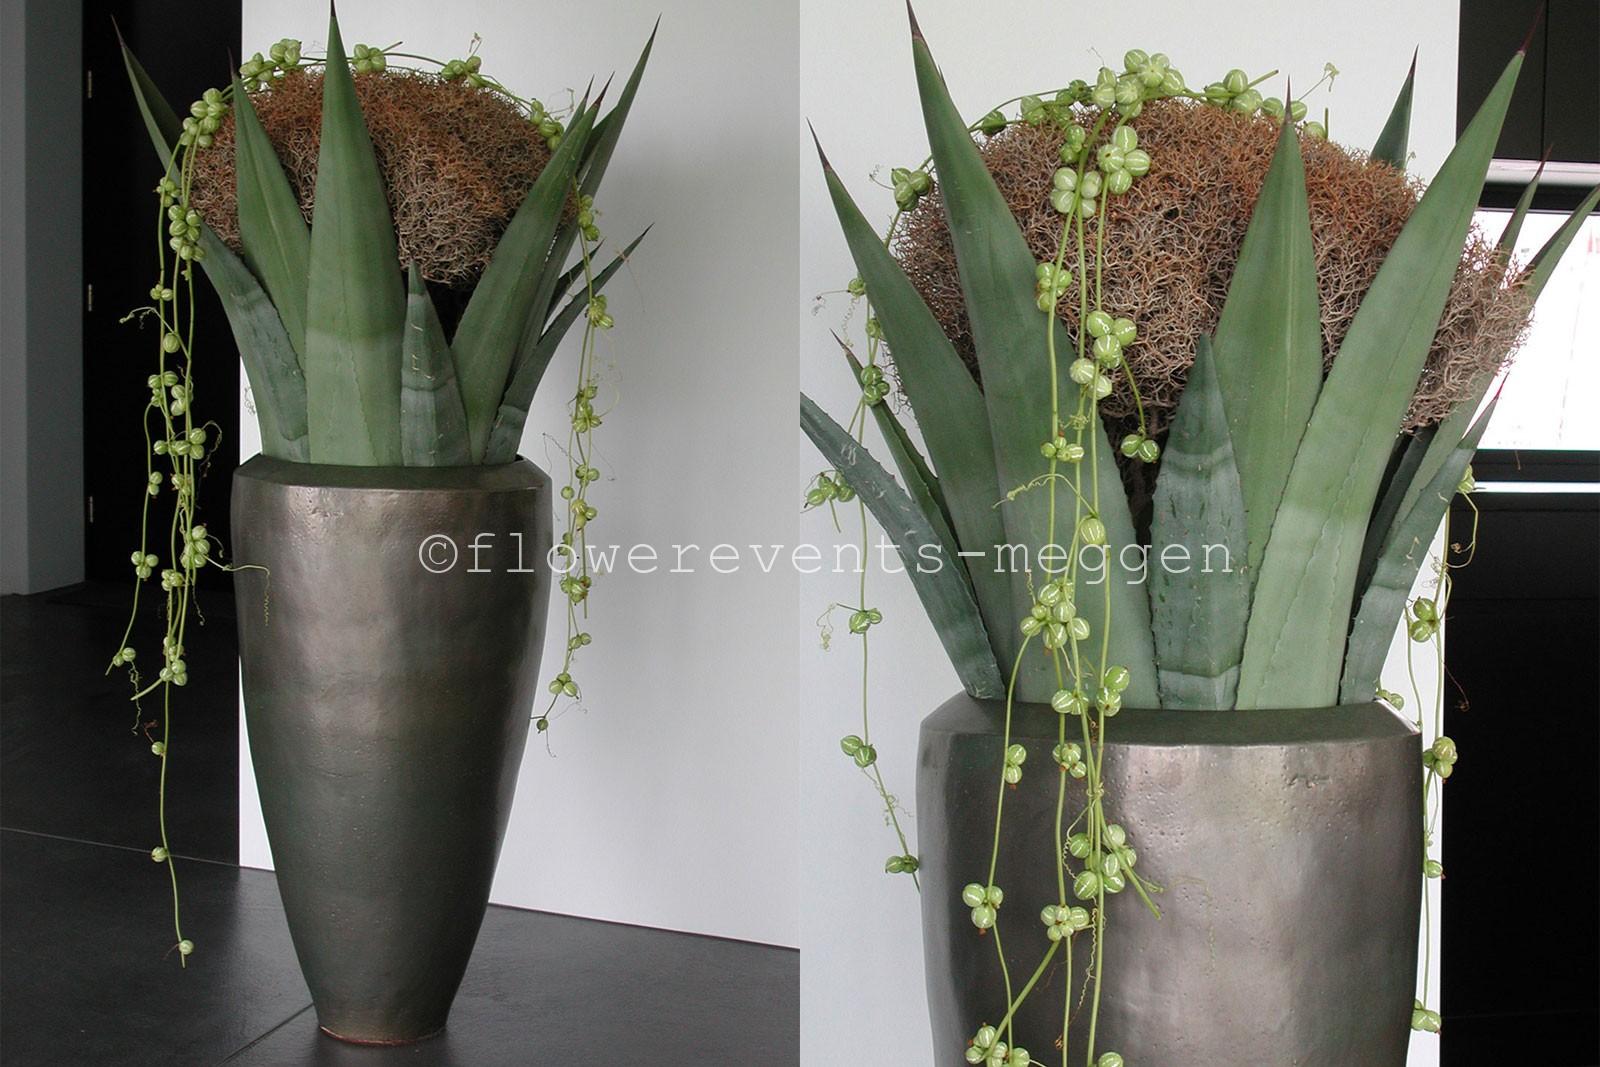 Mobach J6 with agave leaves and creta-euphorbia